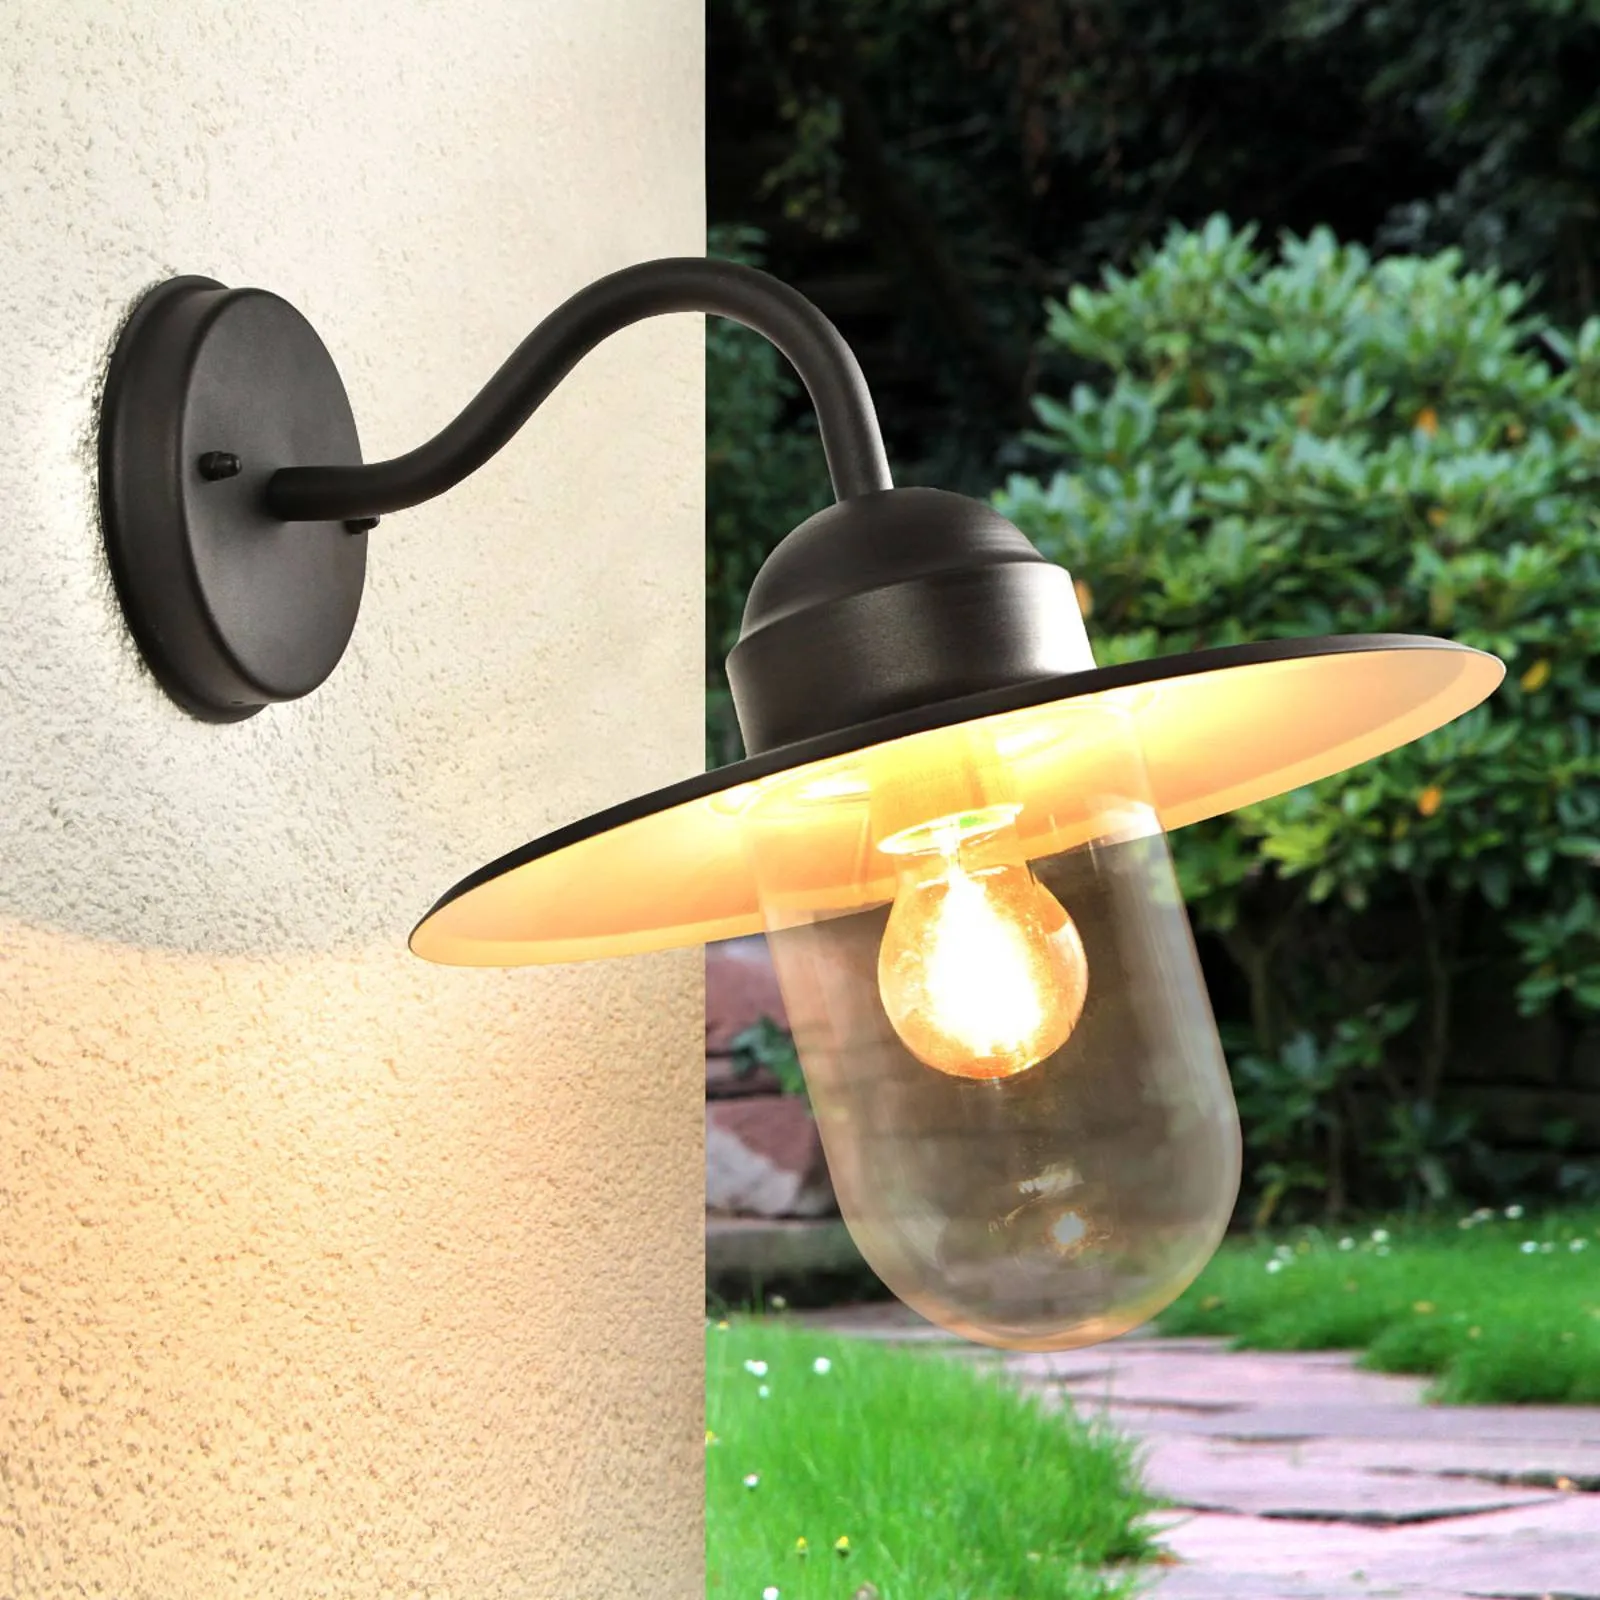 Black country house style outdoor wall light Filip